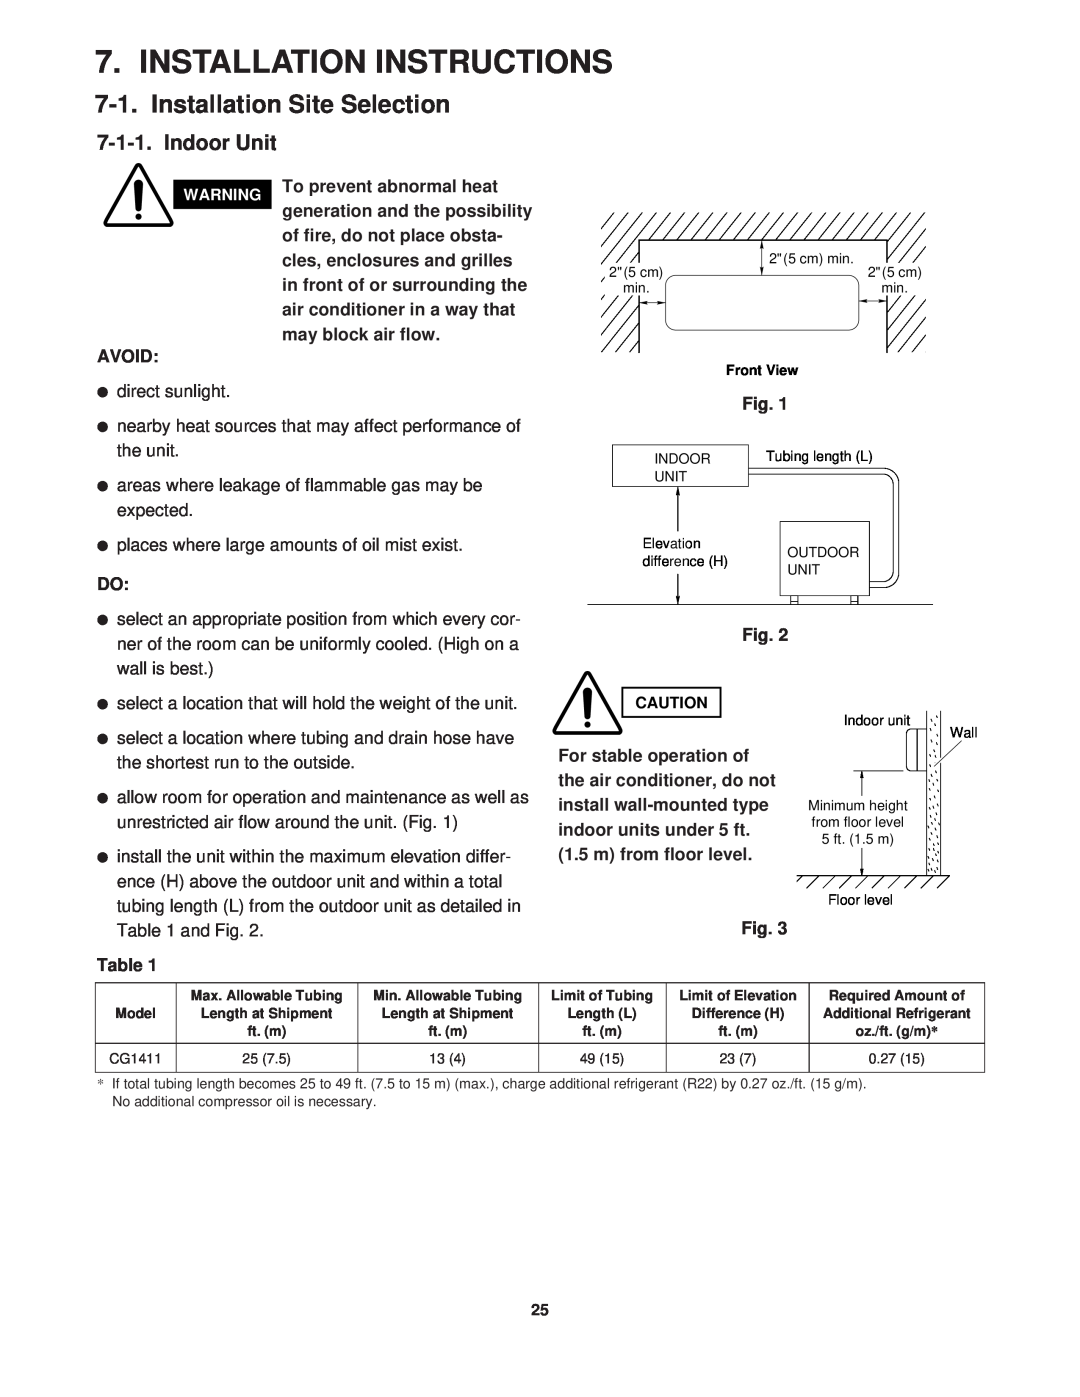 Sanyo KGS1411, CG1411 service manual Installation Instructions, Installation Site Selection, Indoor Unit 